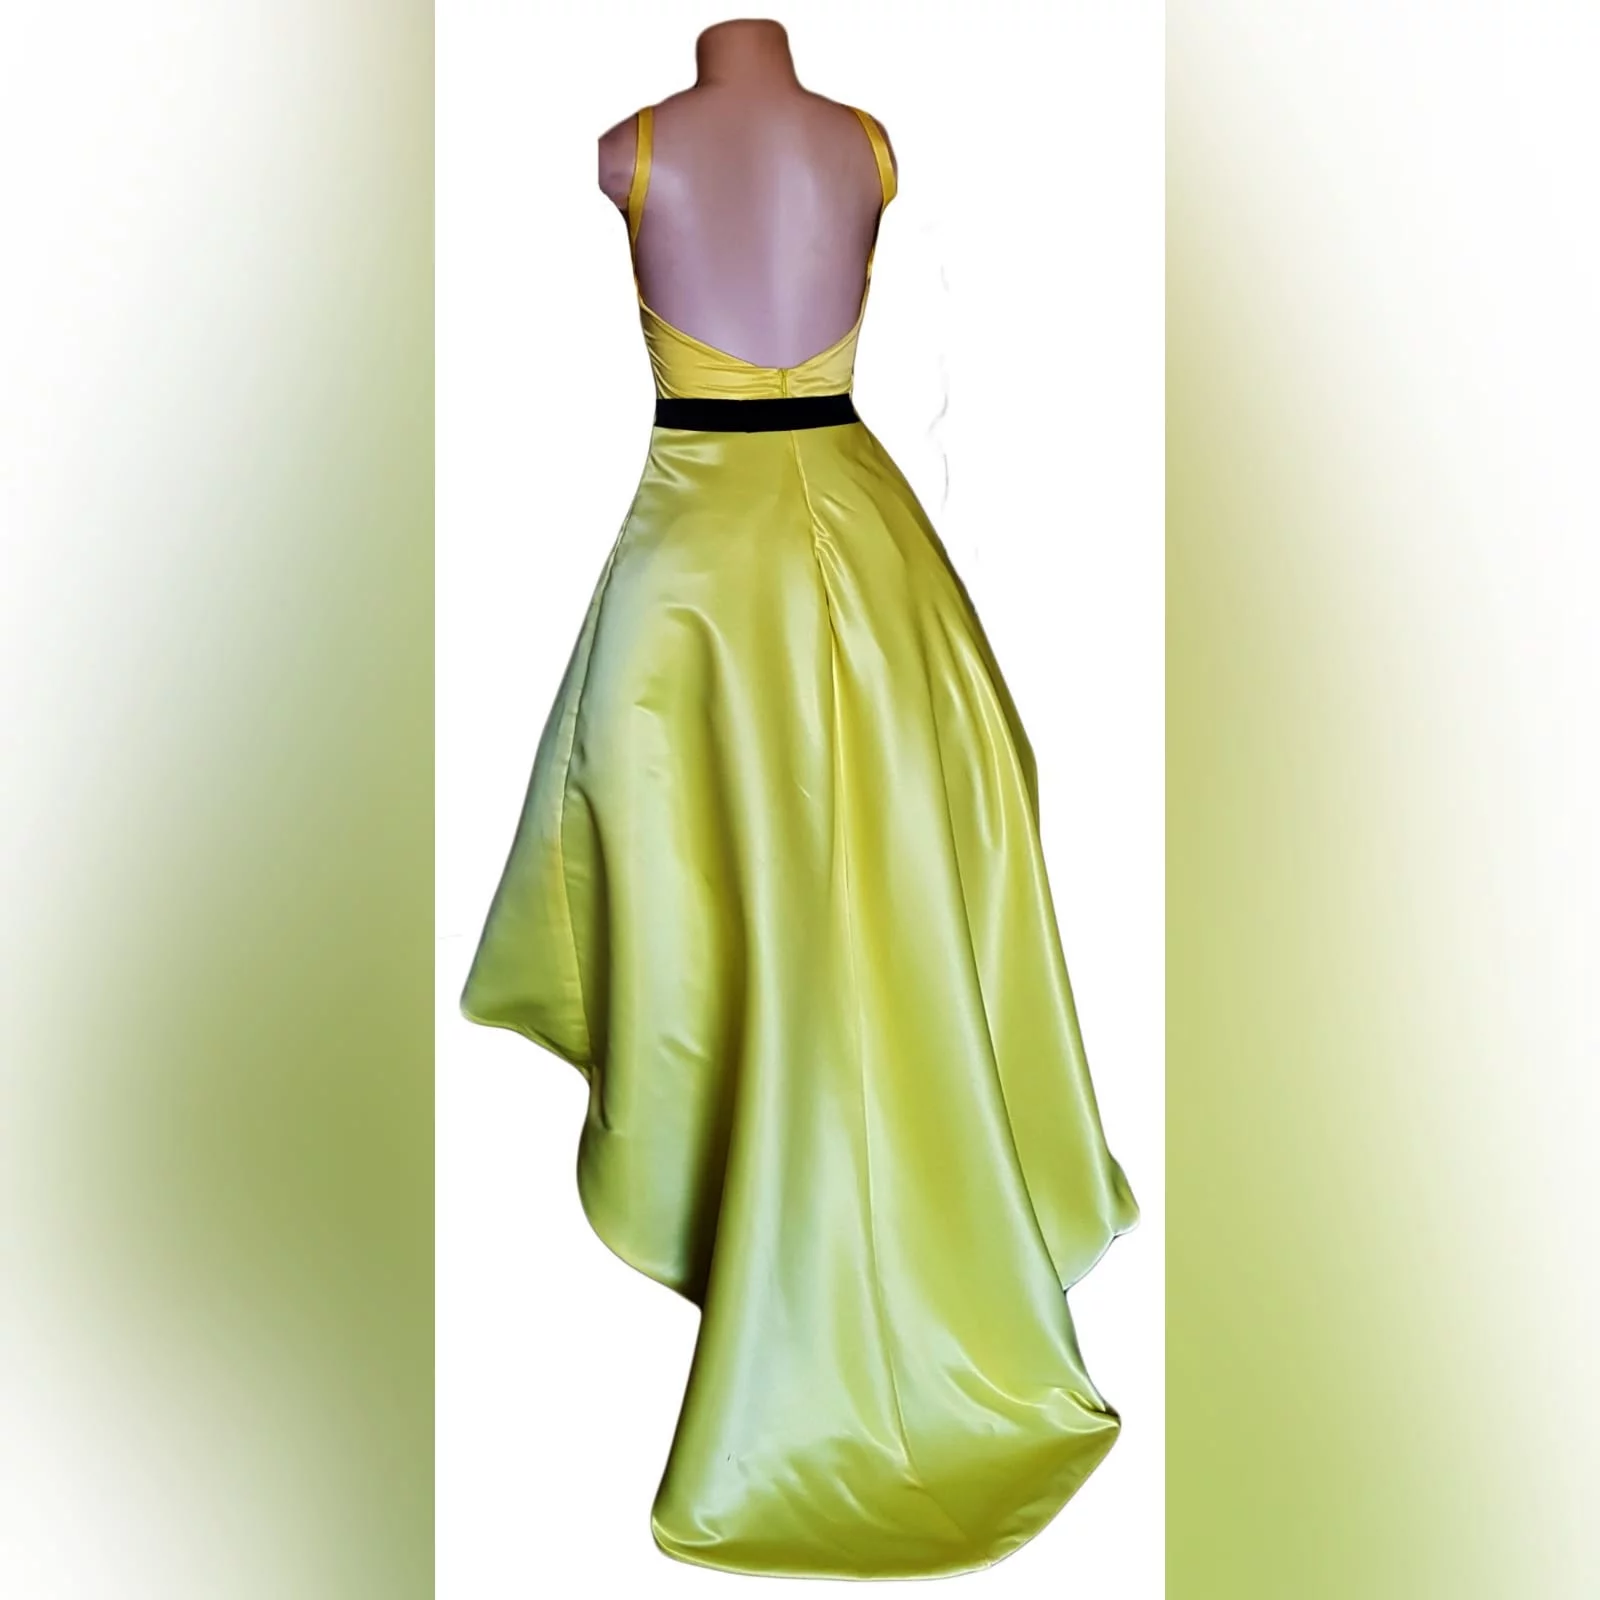 Yellow & black high low matric farewell dress 6 yellow & black high low matric farewell dress with an open back, pockets and a detachable black belt